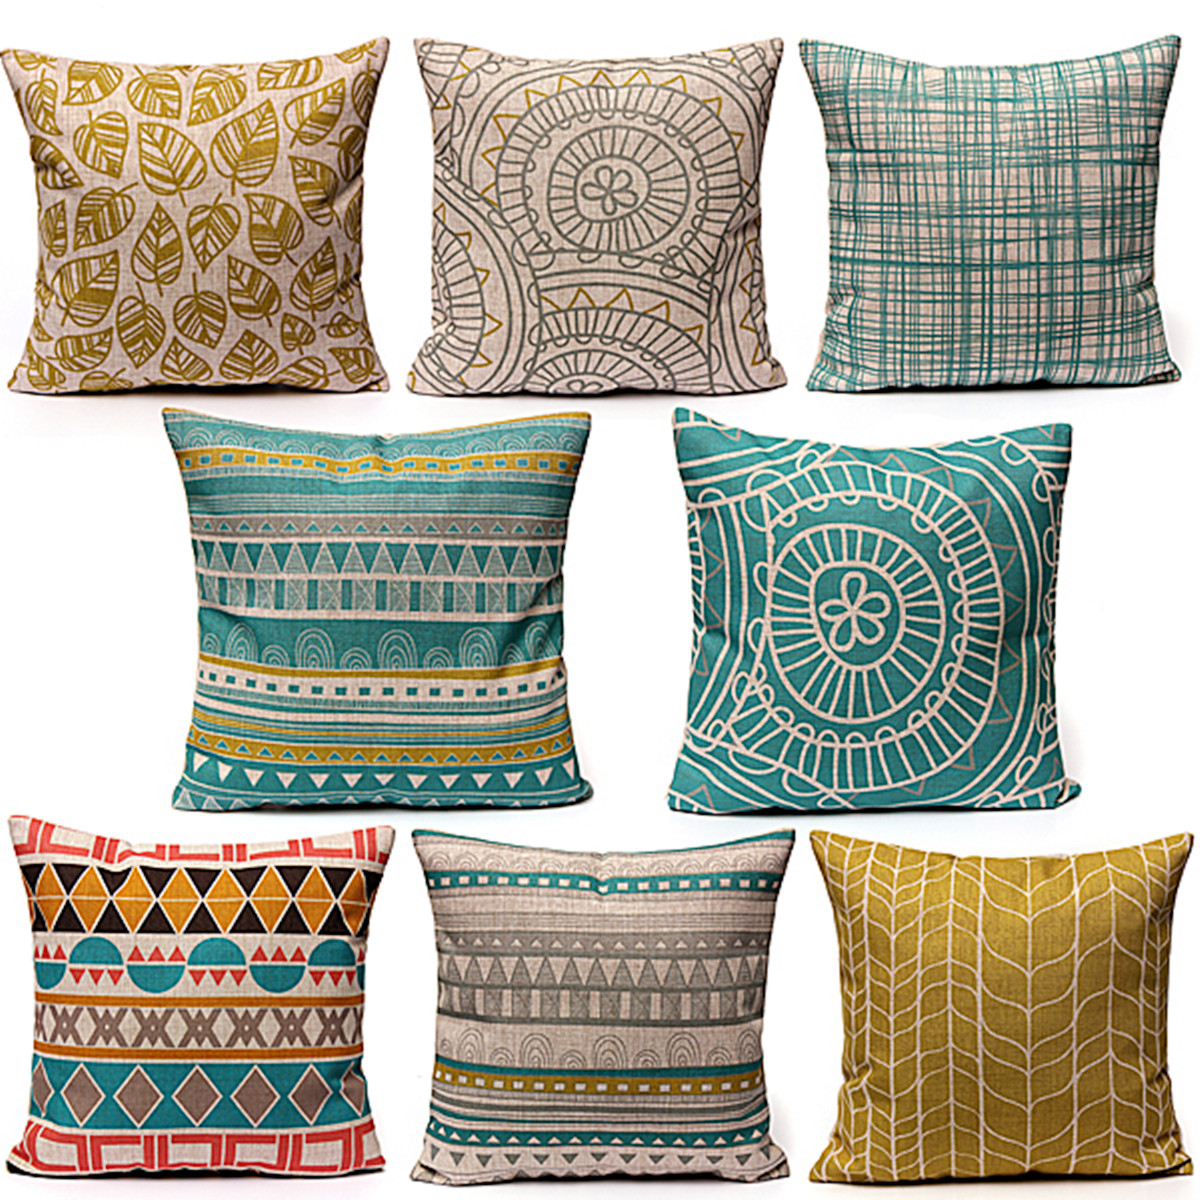 Minimalist-Style-Pillow-Case-Home-Linen-Cushion-Cover-Fashion-Colorful-Geometric-Patterns-951098-10